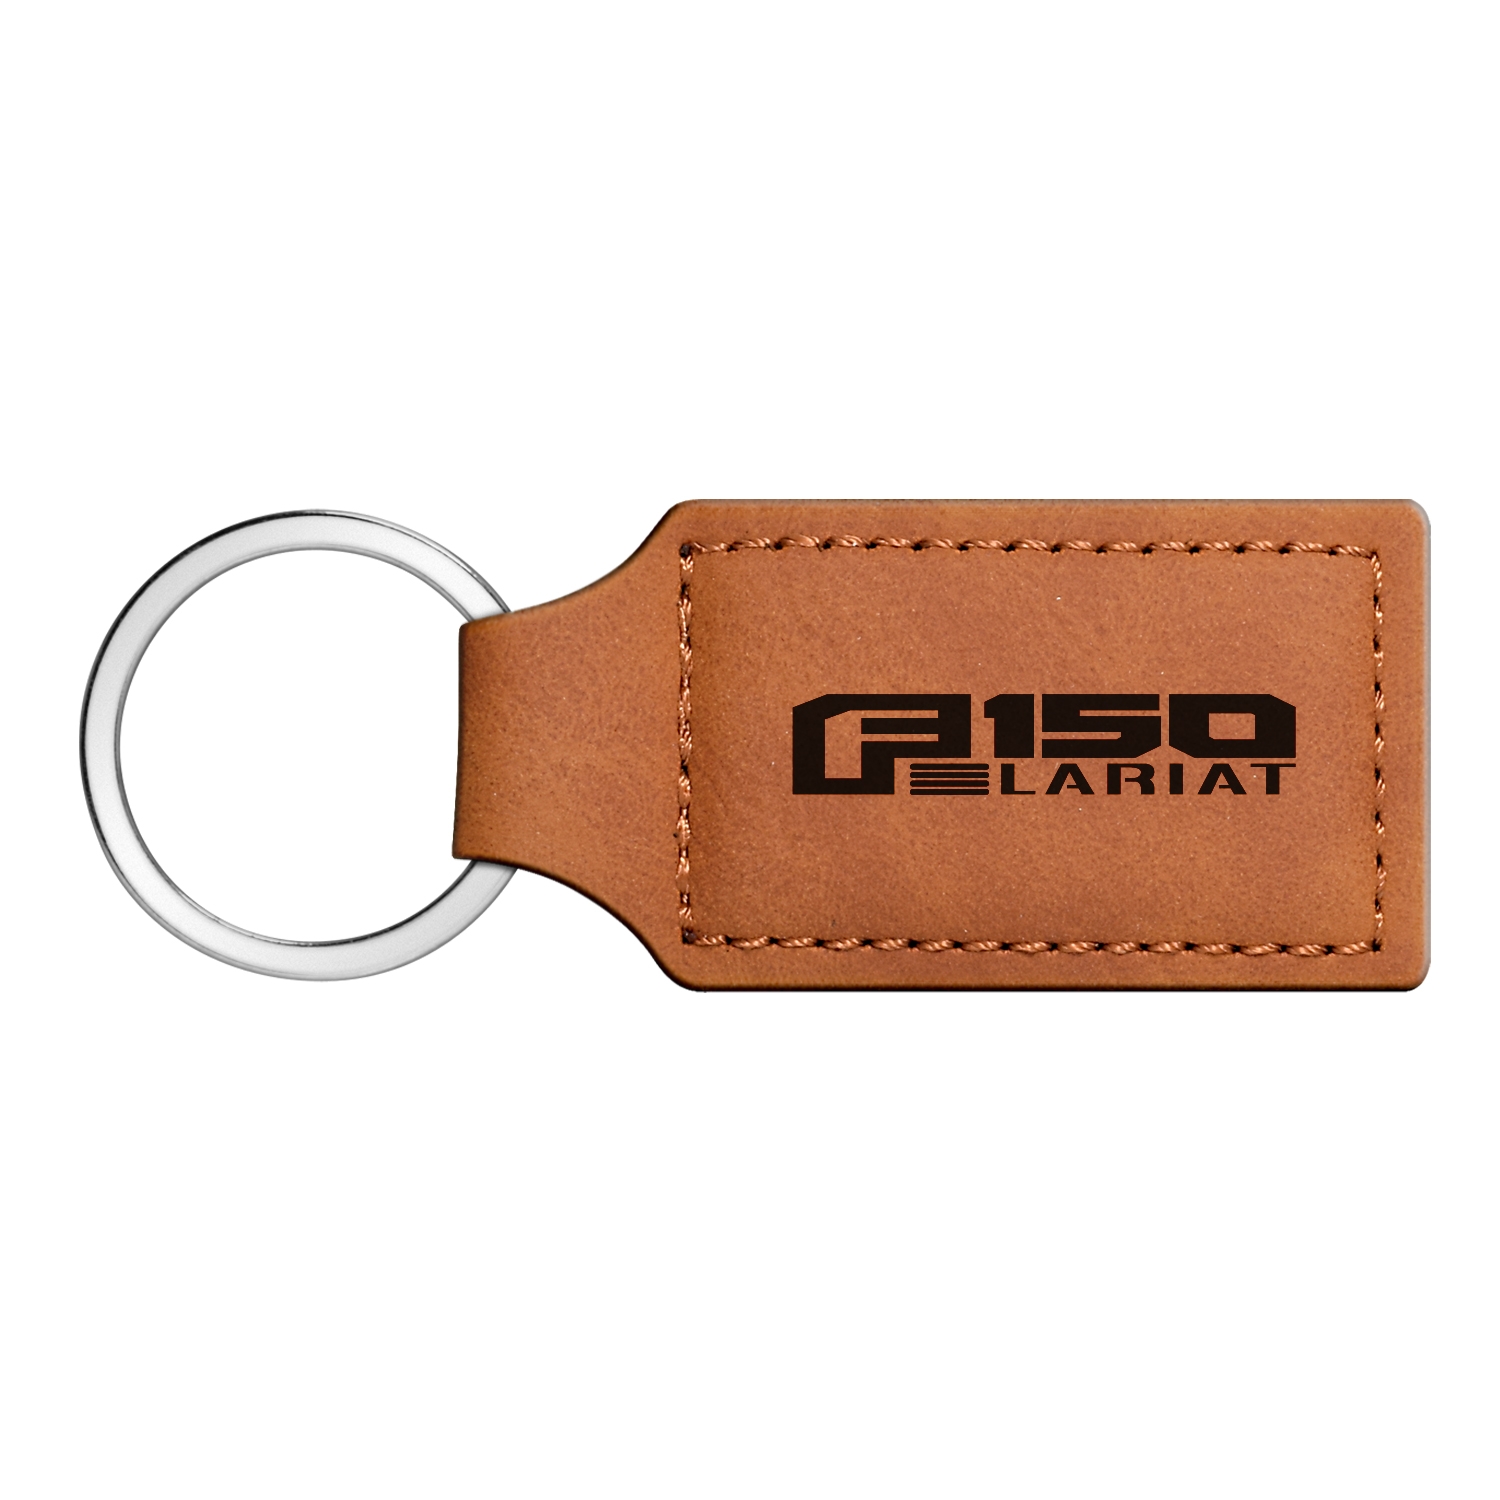 Ford F150 Lariat Rectangular Brown Leather Key Chain